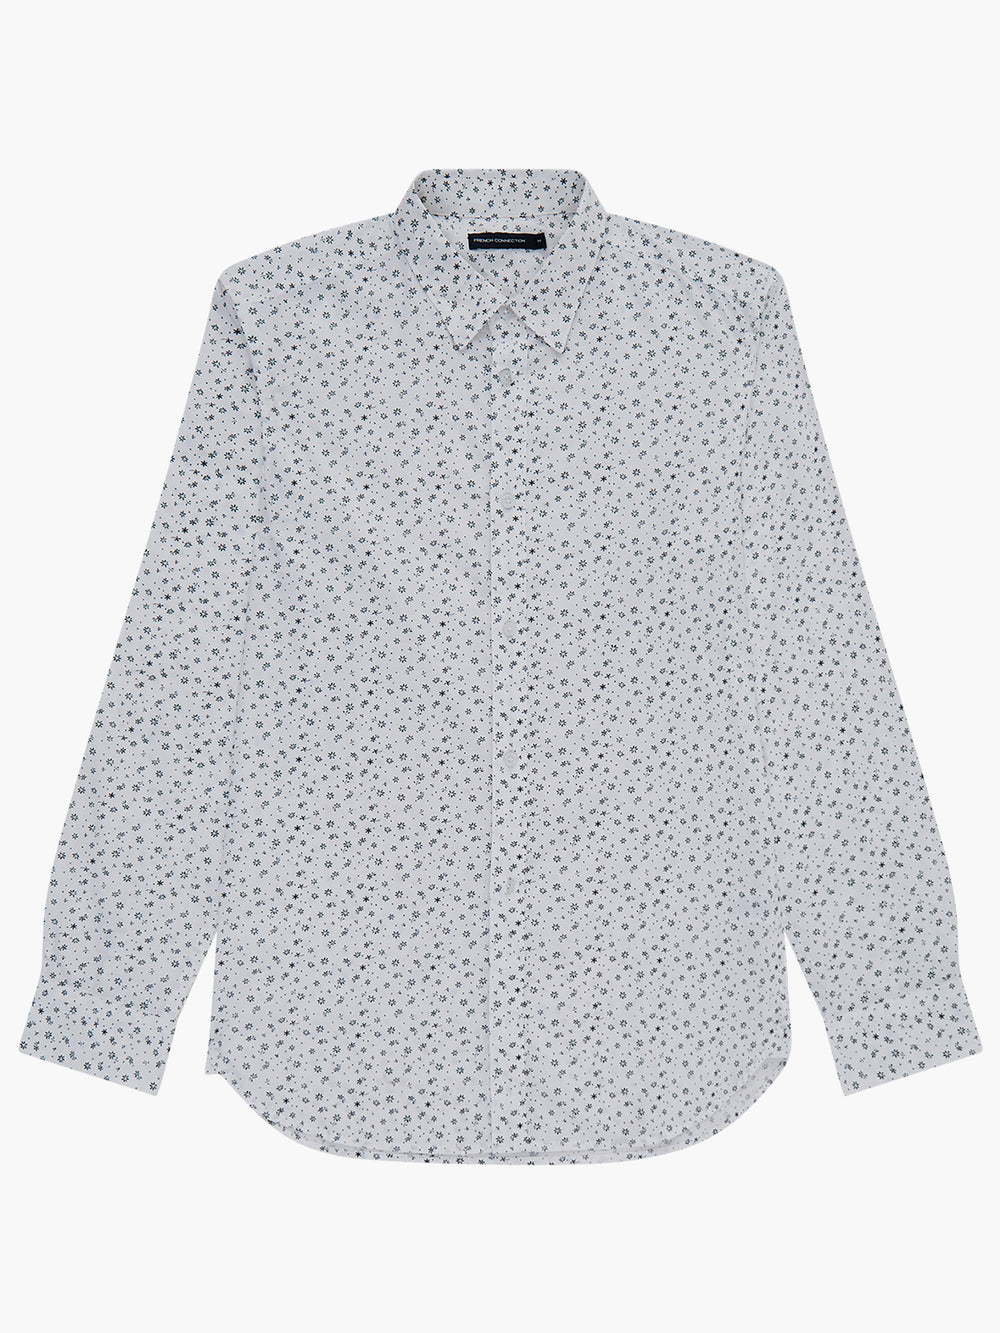 Floral Long Sleeve Shirt White/Black Flower | French Connection UK